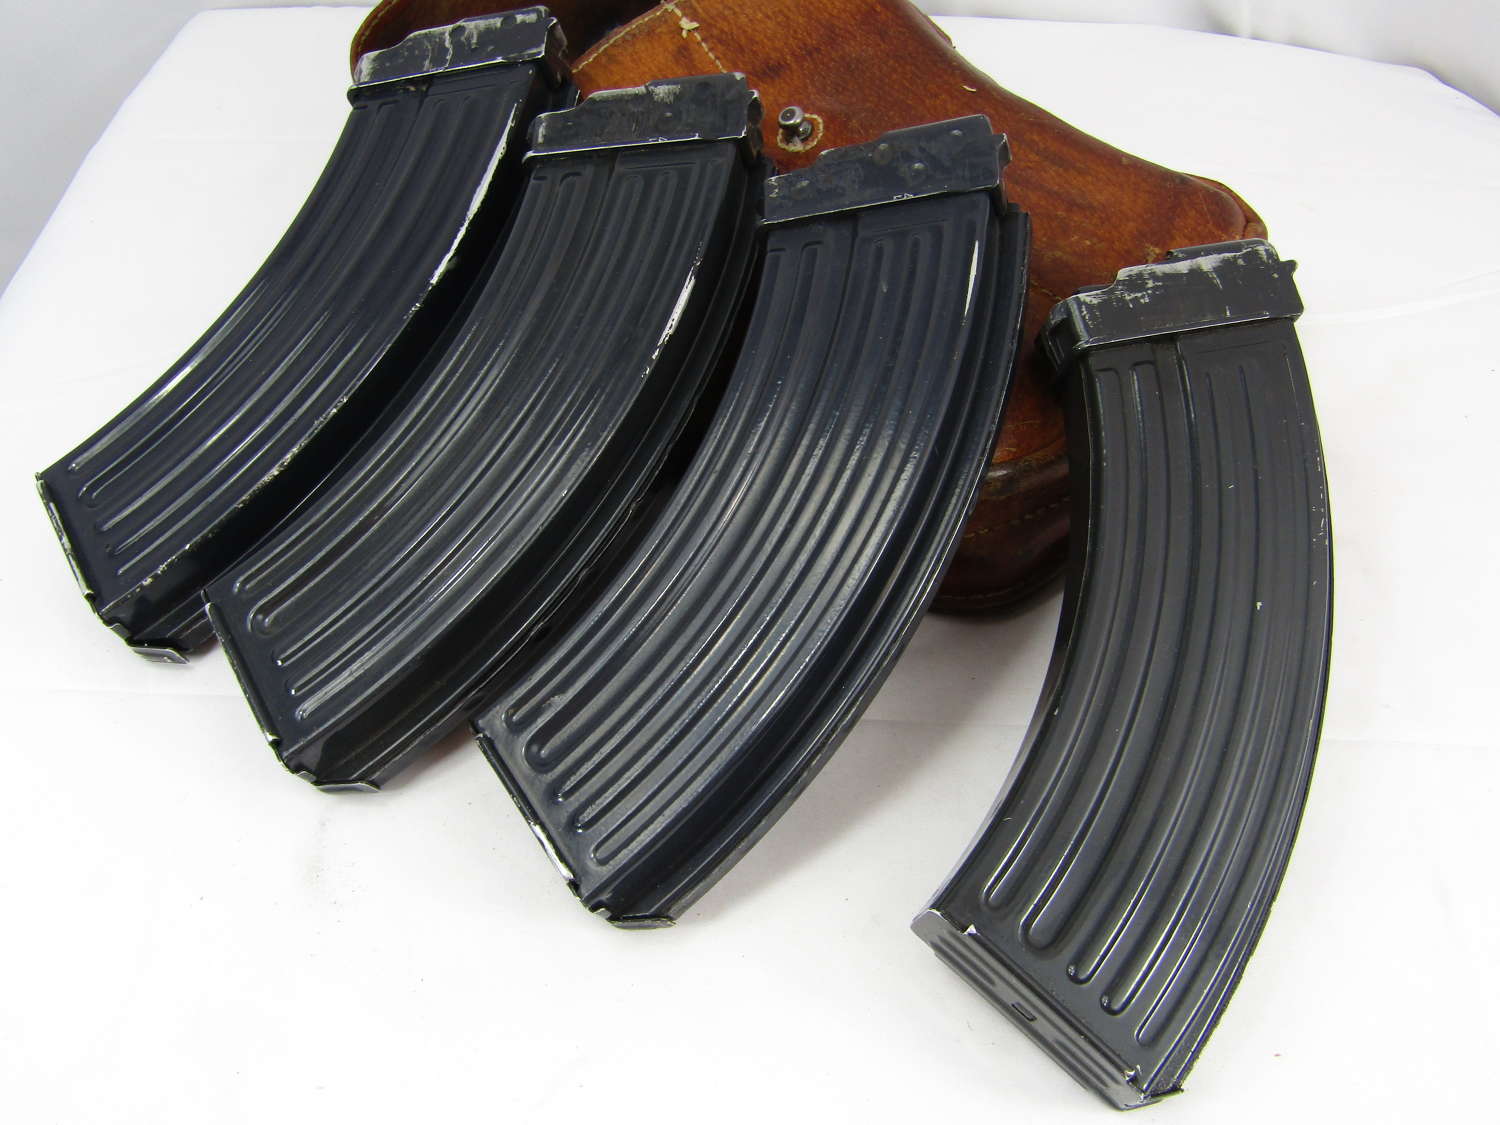 VZ 58 Magazines And Pouch